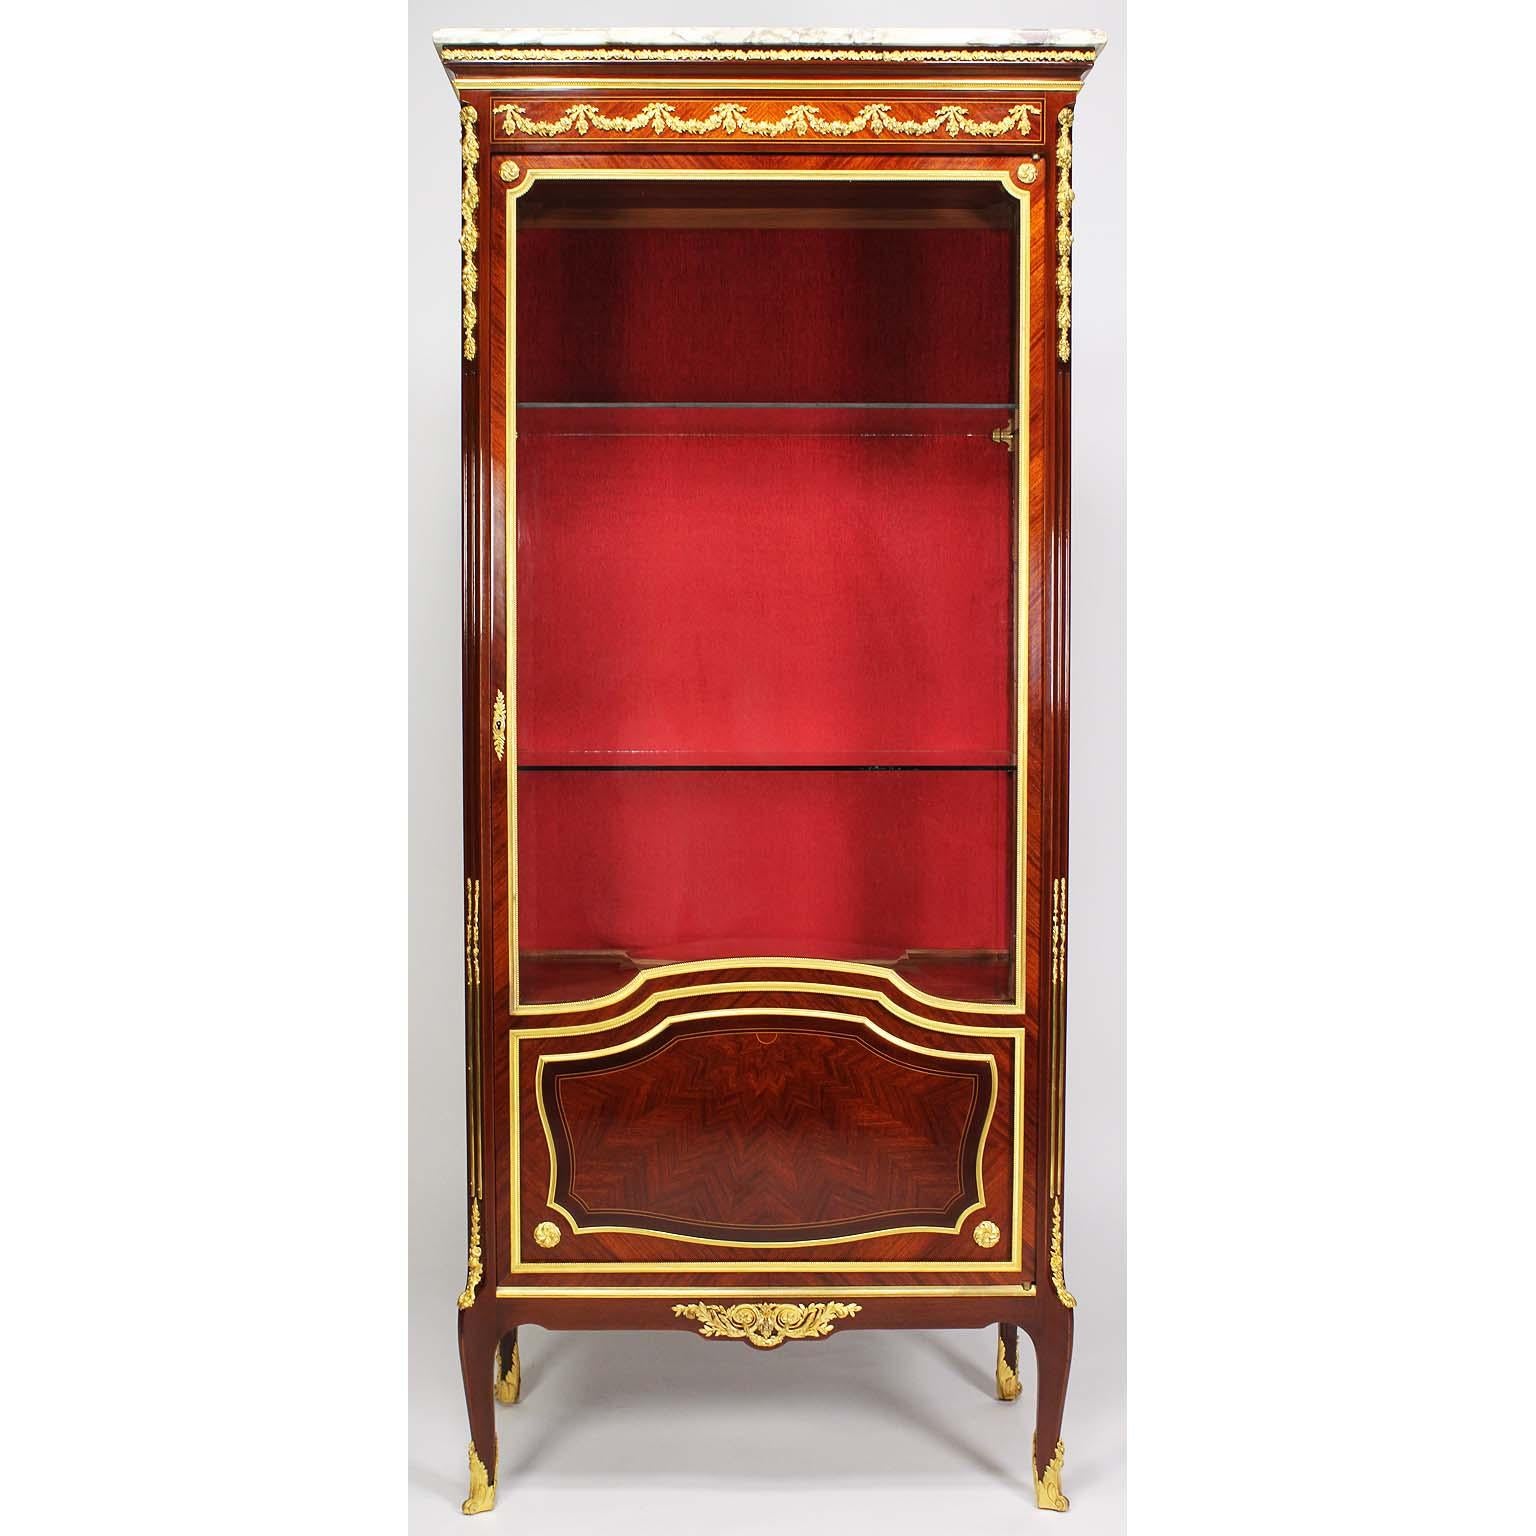 A very fine French Louis XV style Belle Époque mahogany and tulipwood ormolu-mounted vitrine cabinet with a Brêche violette marble top, attributed to François Linke (1855-1946). The single door vitrine with beveled glass panels, surmounted with